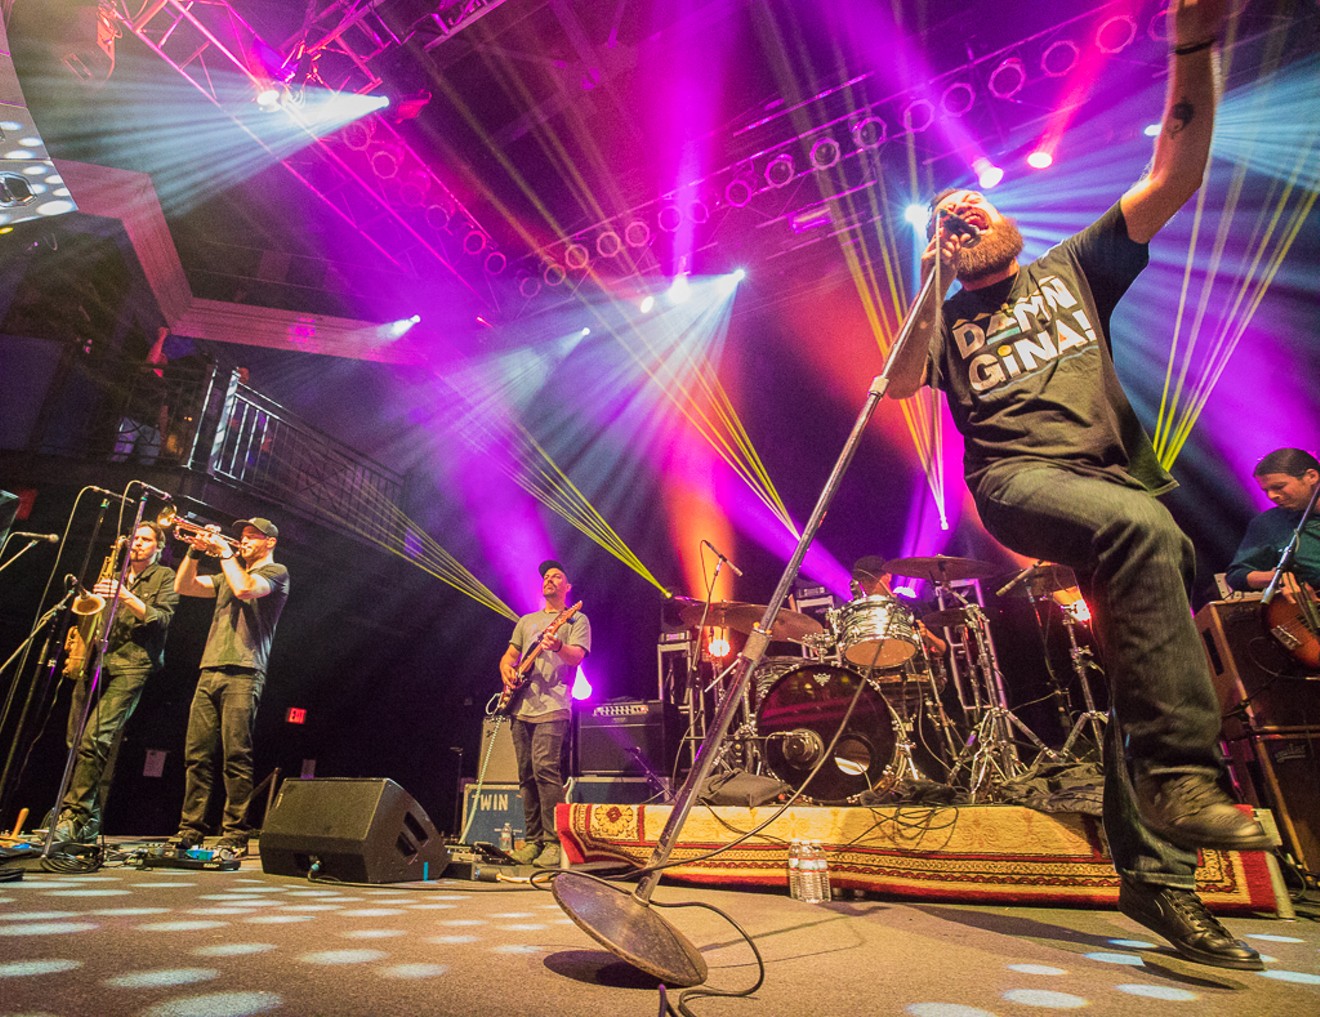 The Motet's new track, "Supernova," will be released widely Friday, May 19, ahead of the band's June 2 Red Rocks concert.